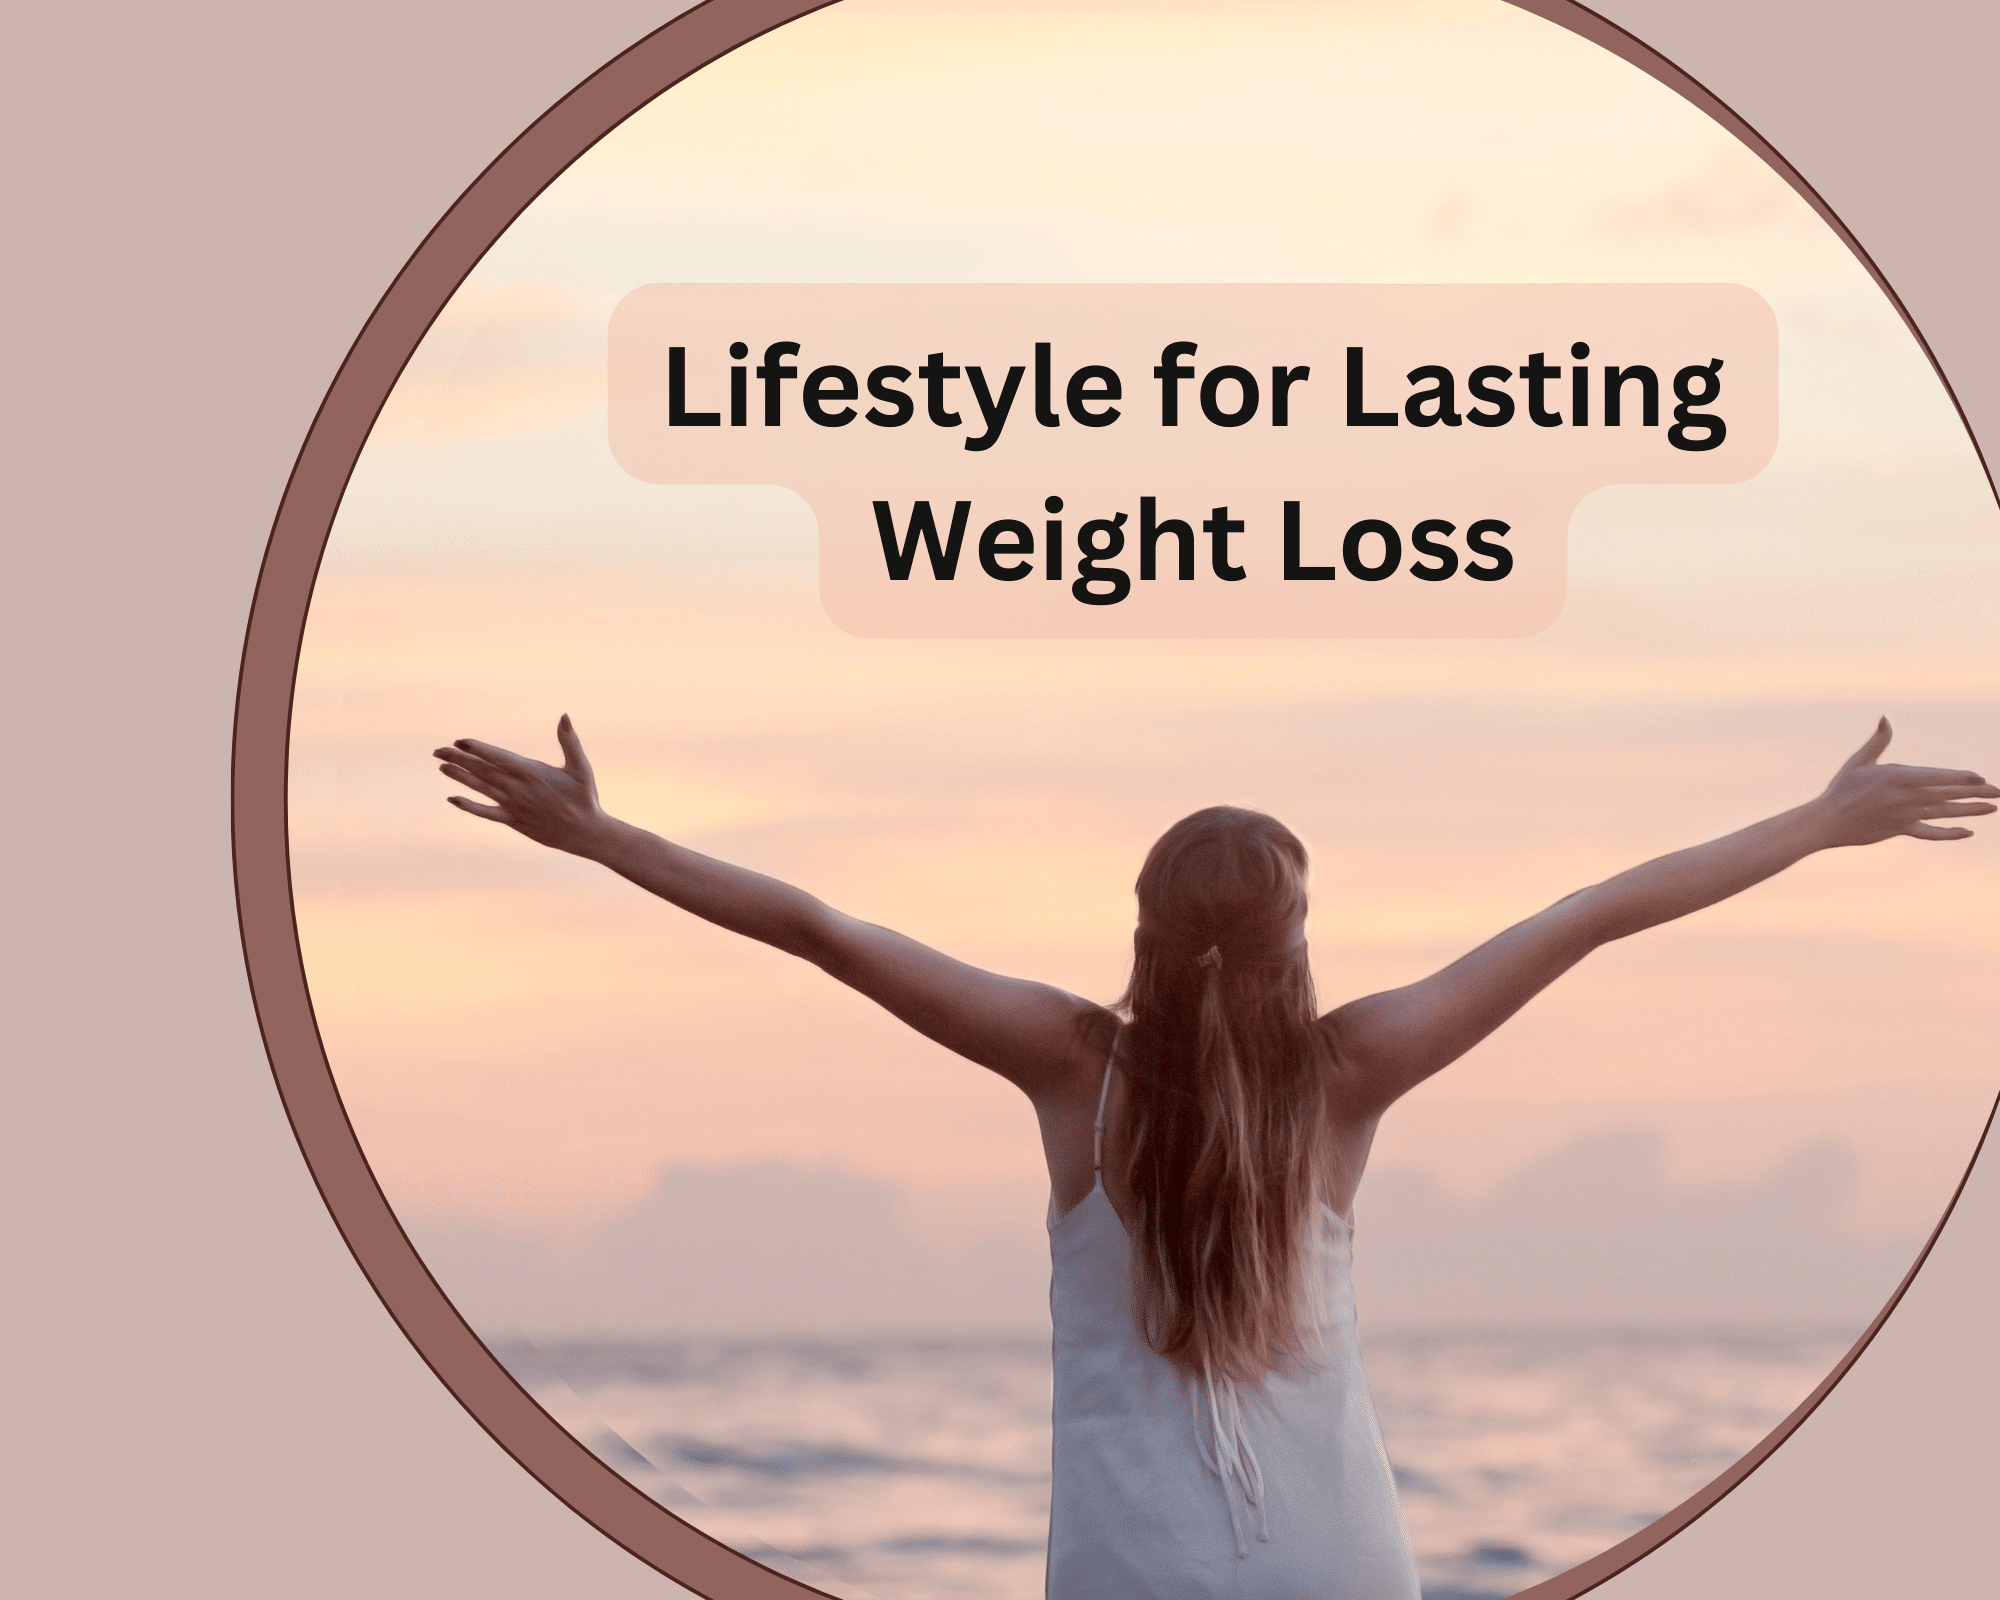 Read more about the article Focus on Lifestyle, Not Dieting, for Lasting Weight Loss.